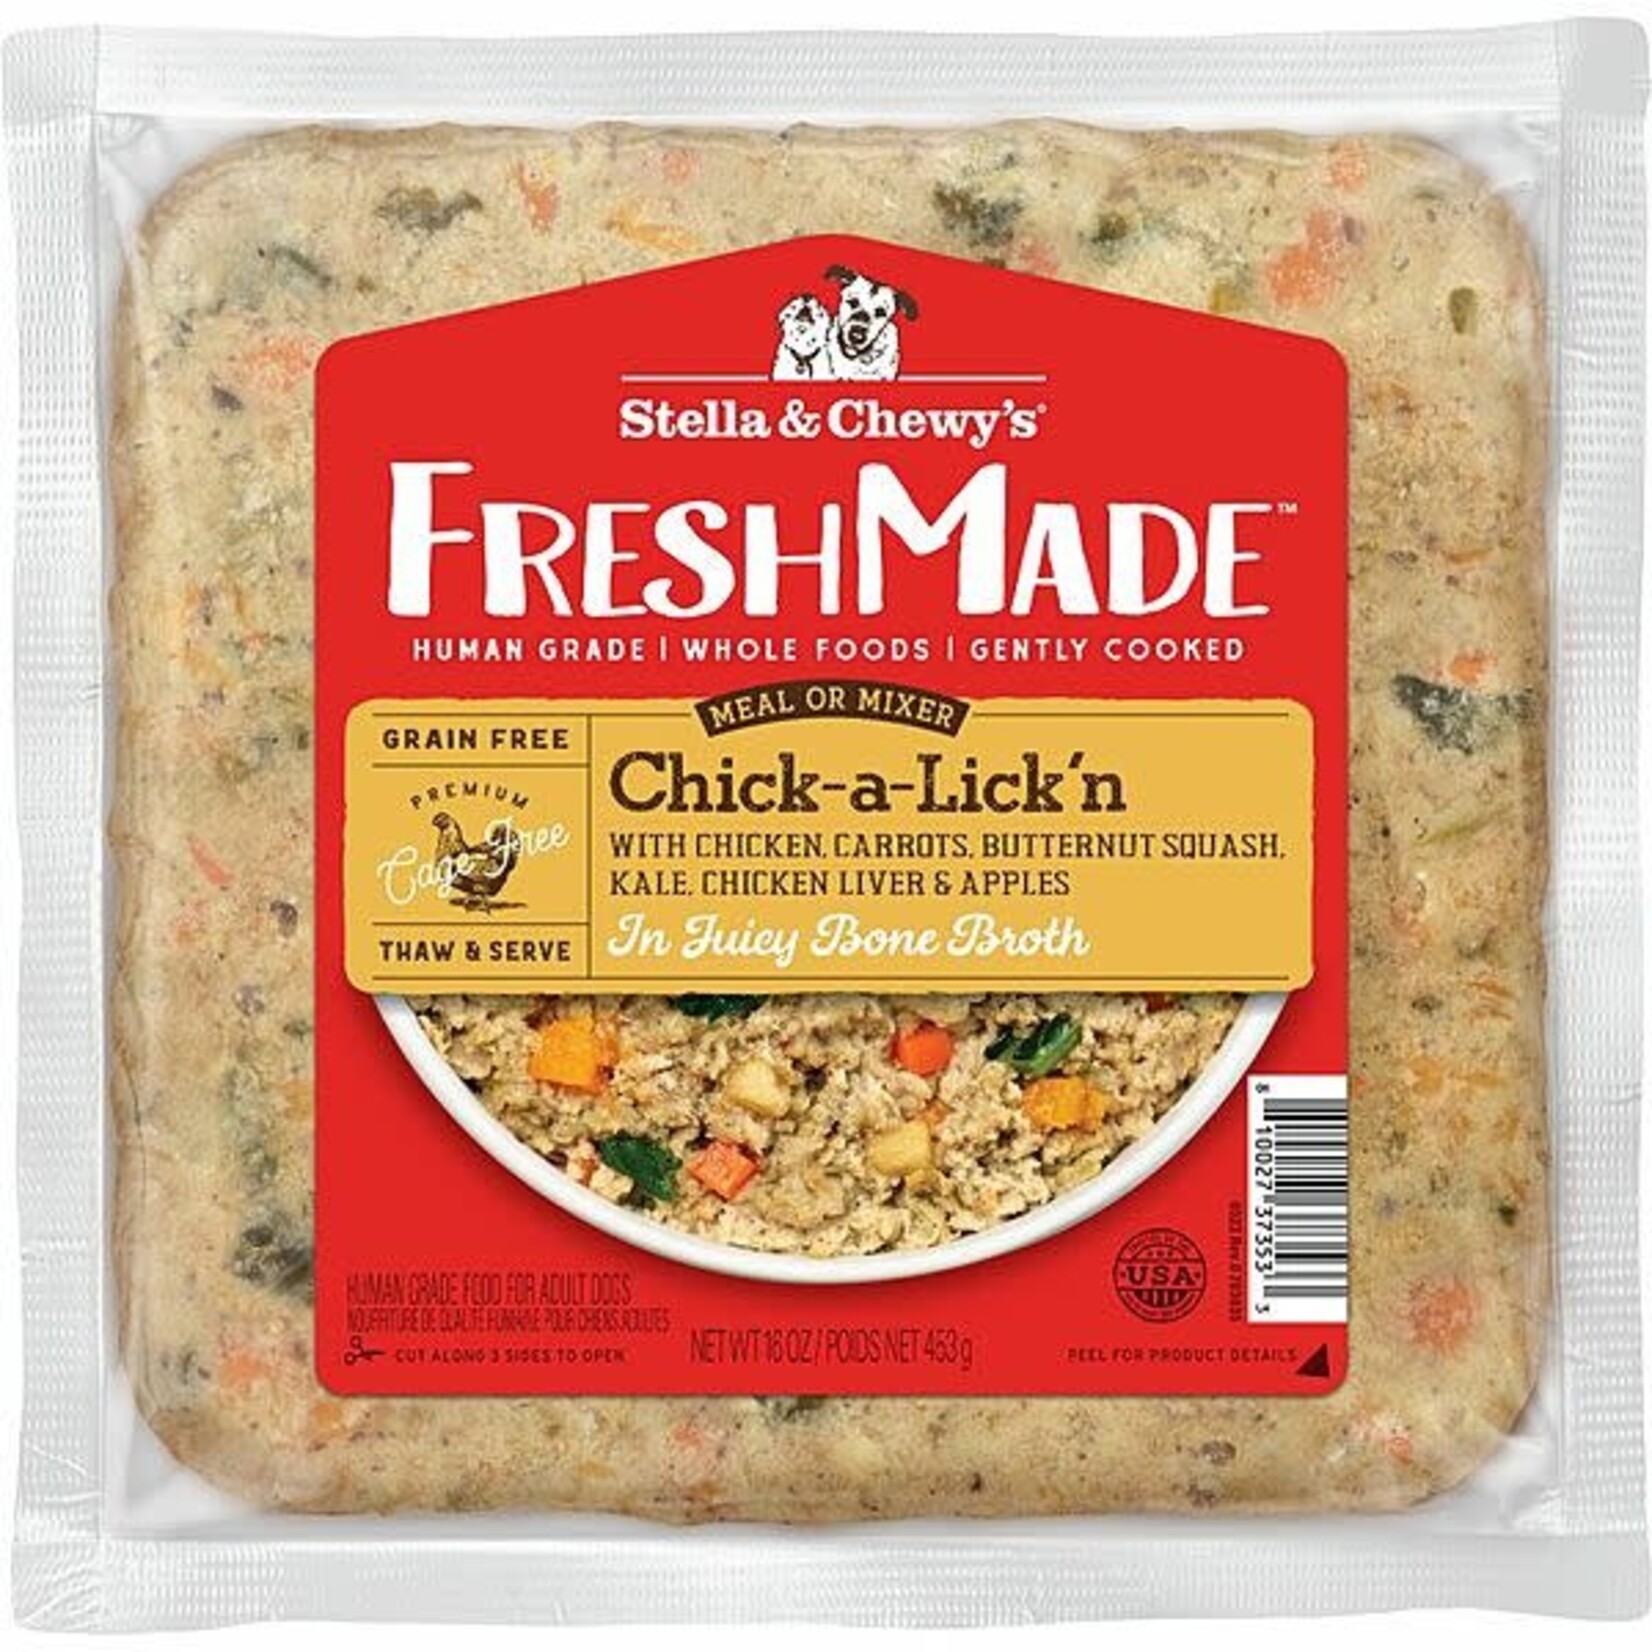 Stella & Chewy's Stella & Chewy Frozen Fresh Made Chick-a-Lick'n 16oz